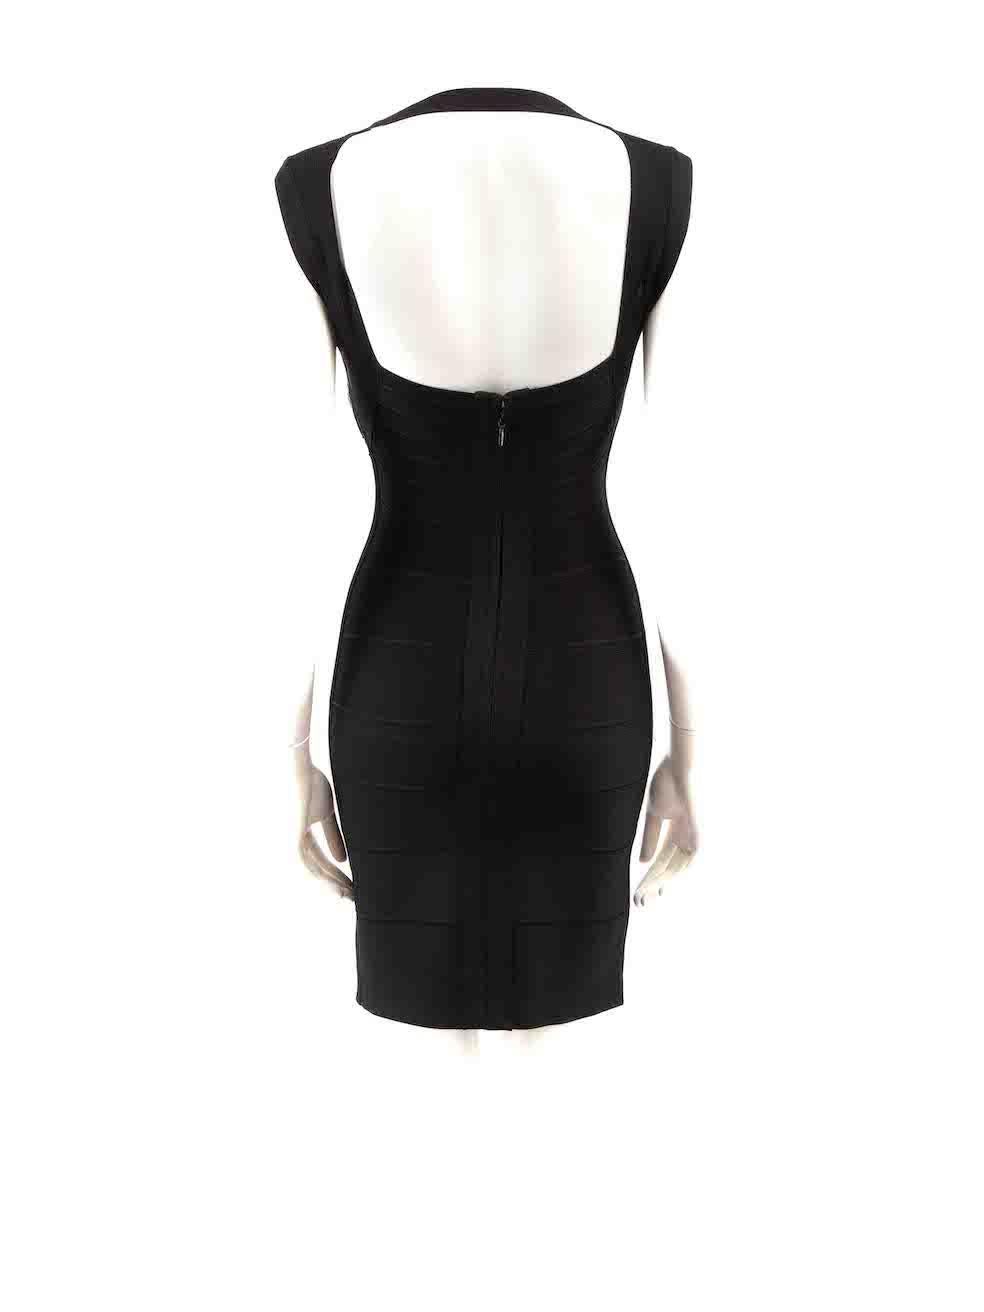 Herve Leger Black Bandage Sequinned Mini Dress Size XXS In Good Condition For Sale In London, GB